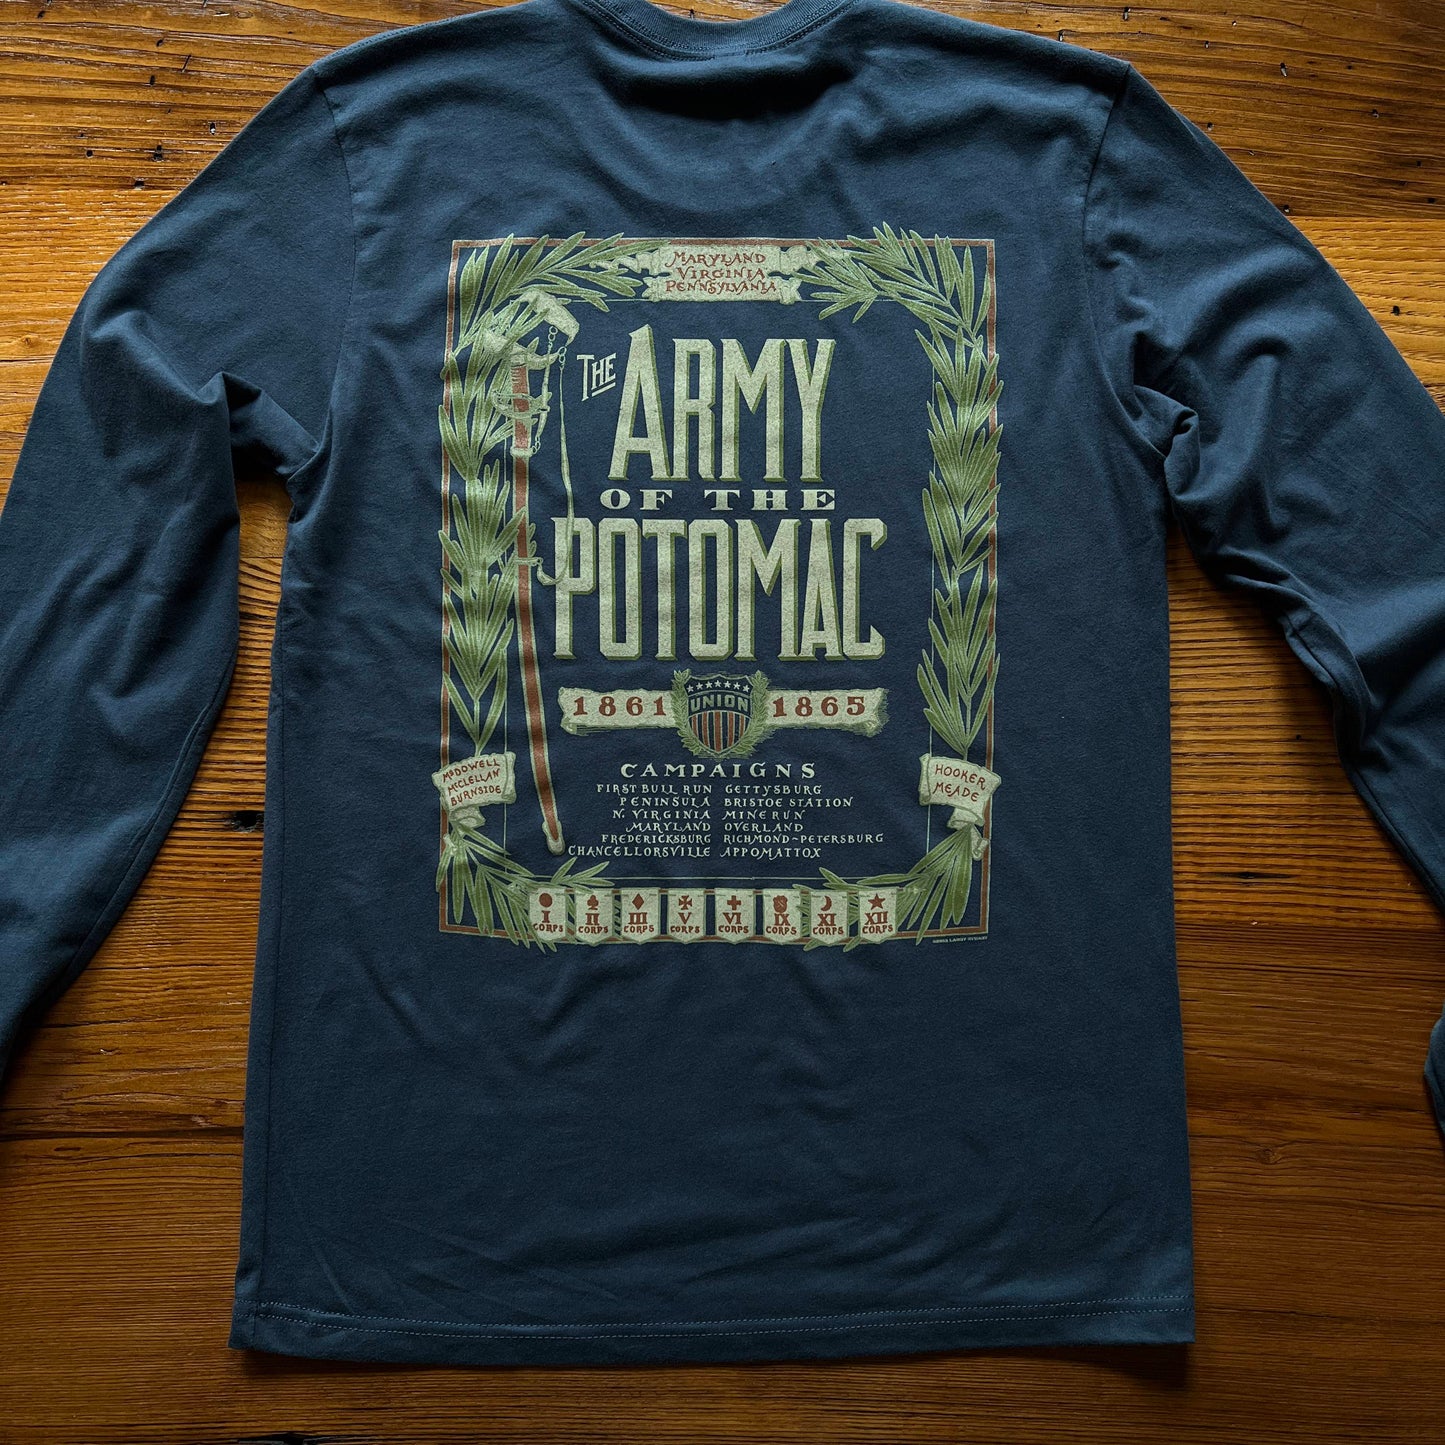 Back of "The Army of the Potomac" Long-sleeved shirt from The History List store